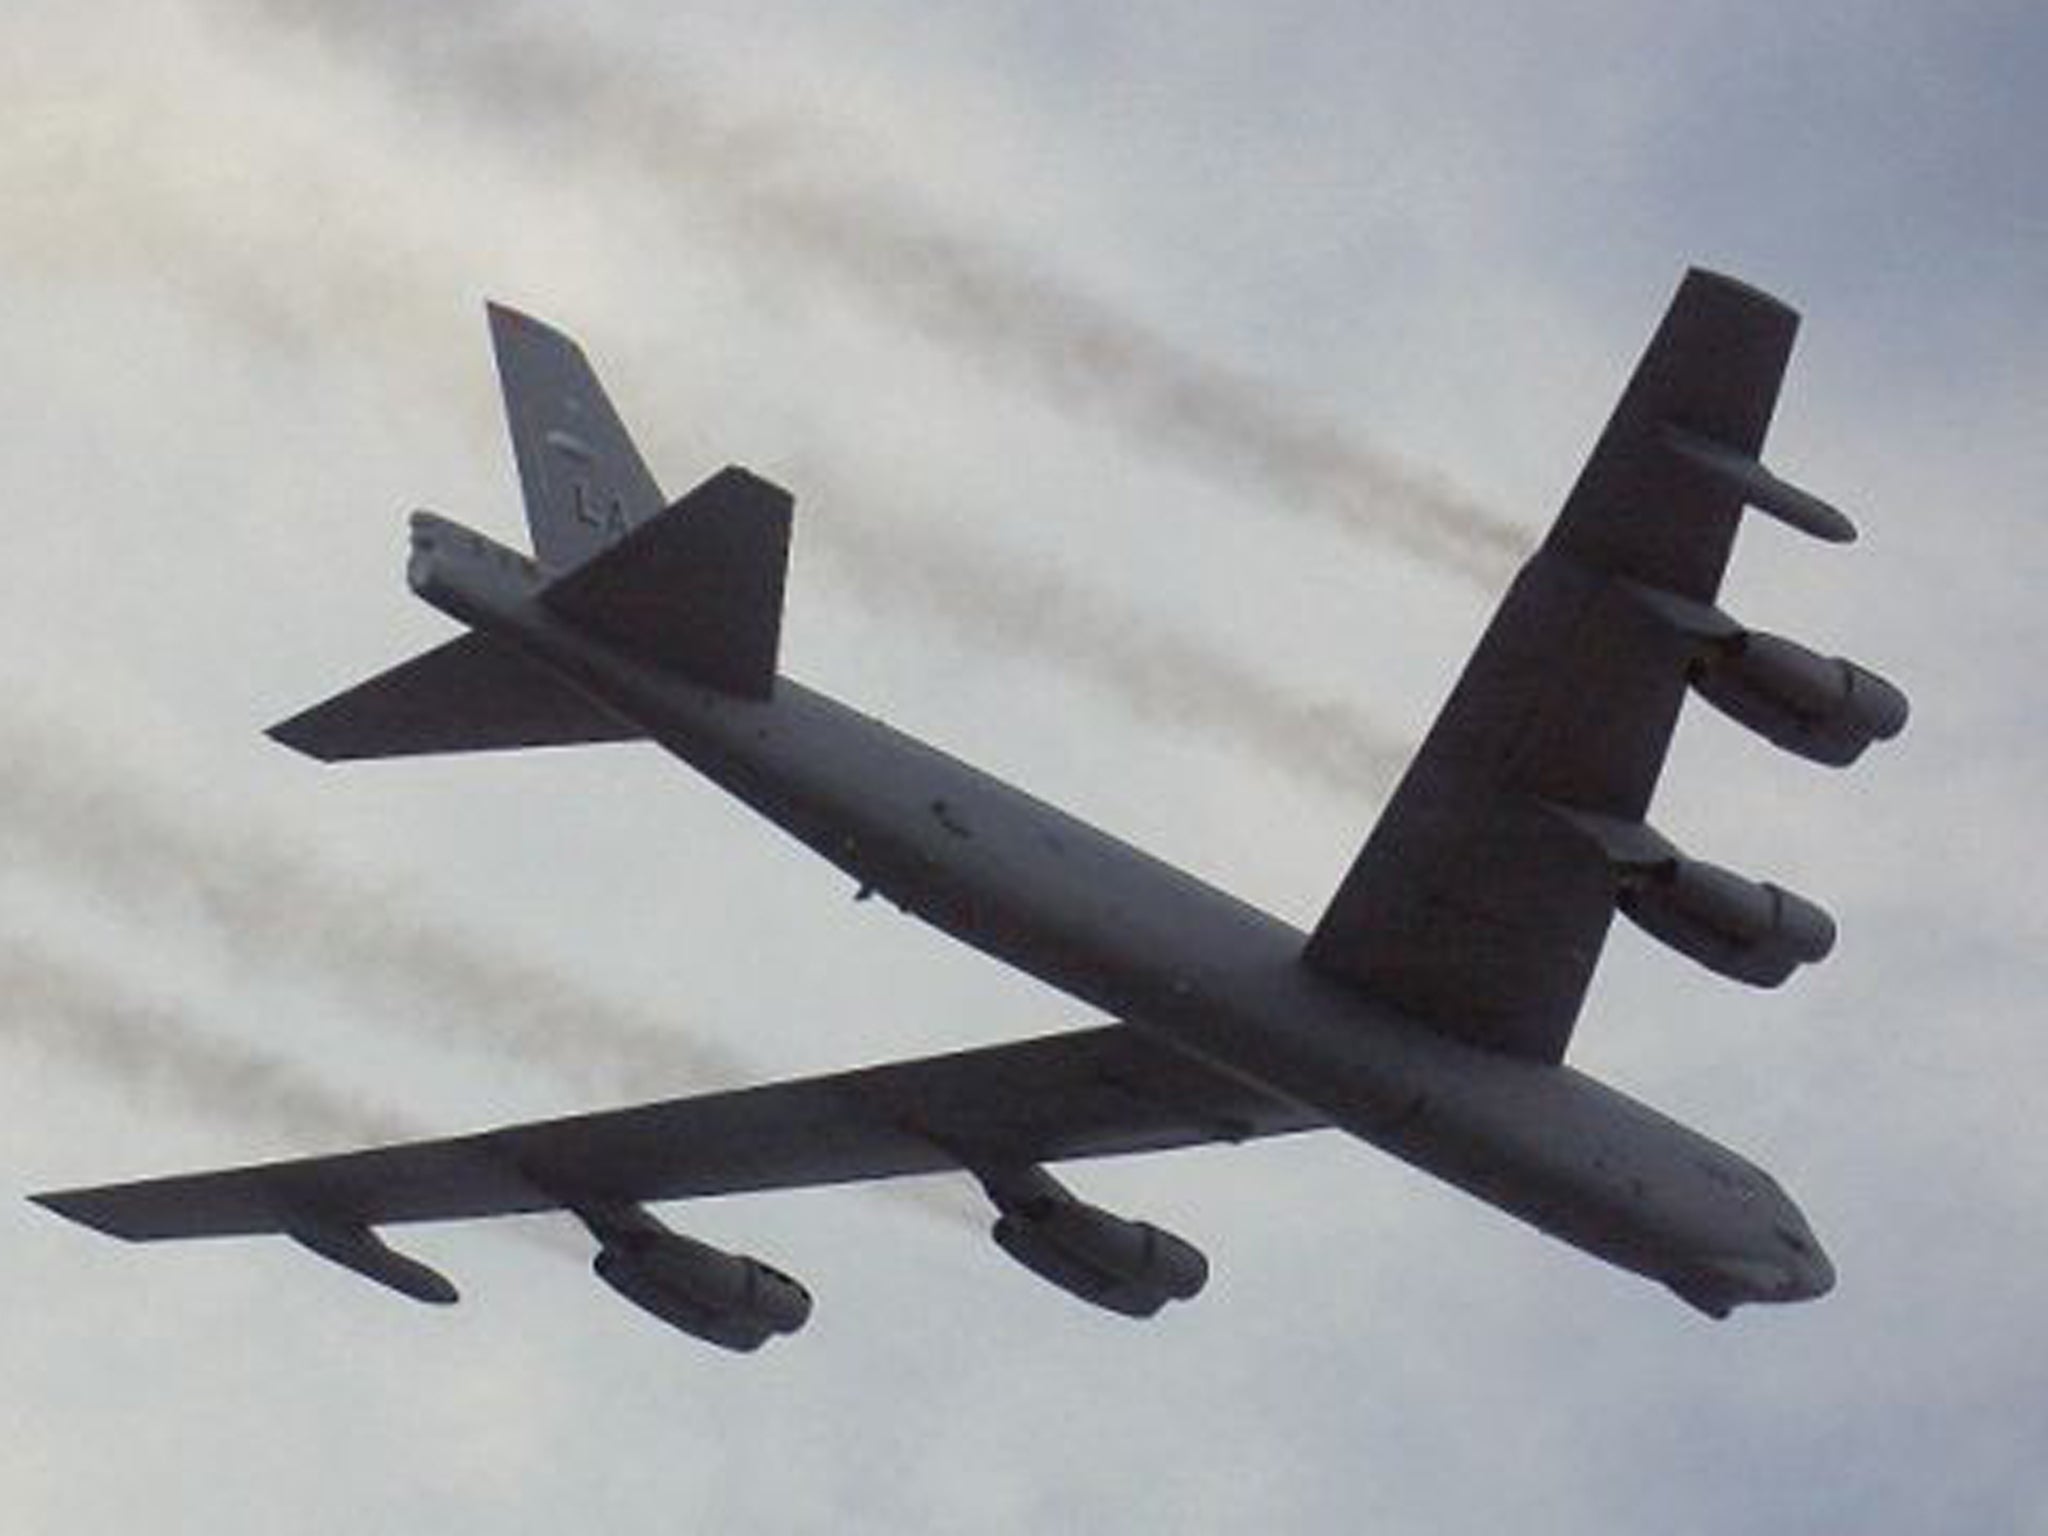 The B-52 has been in active service with the USAF since 1955